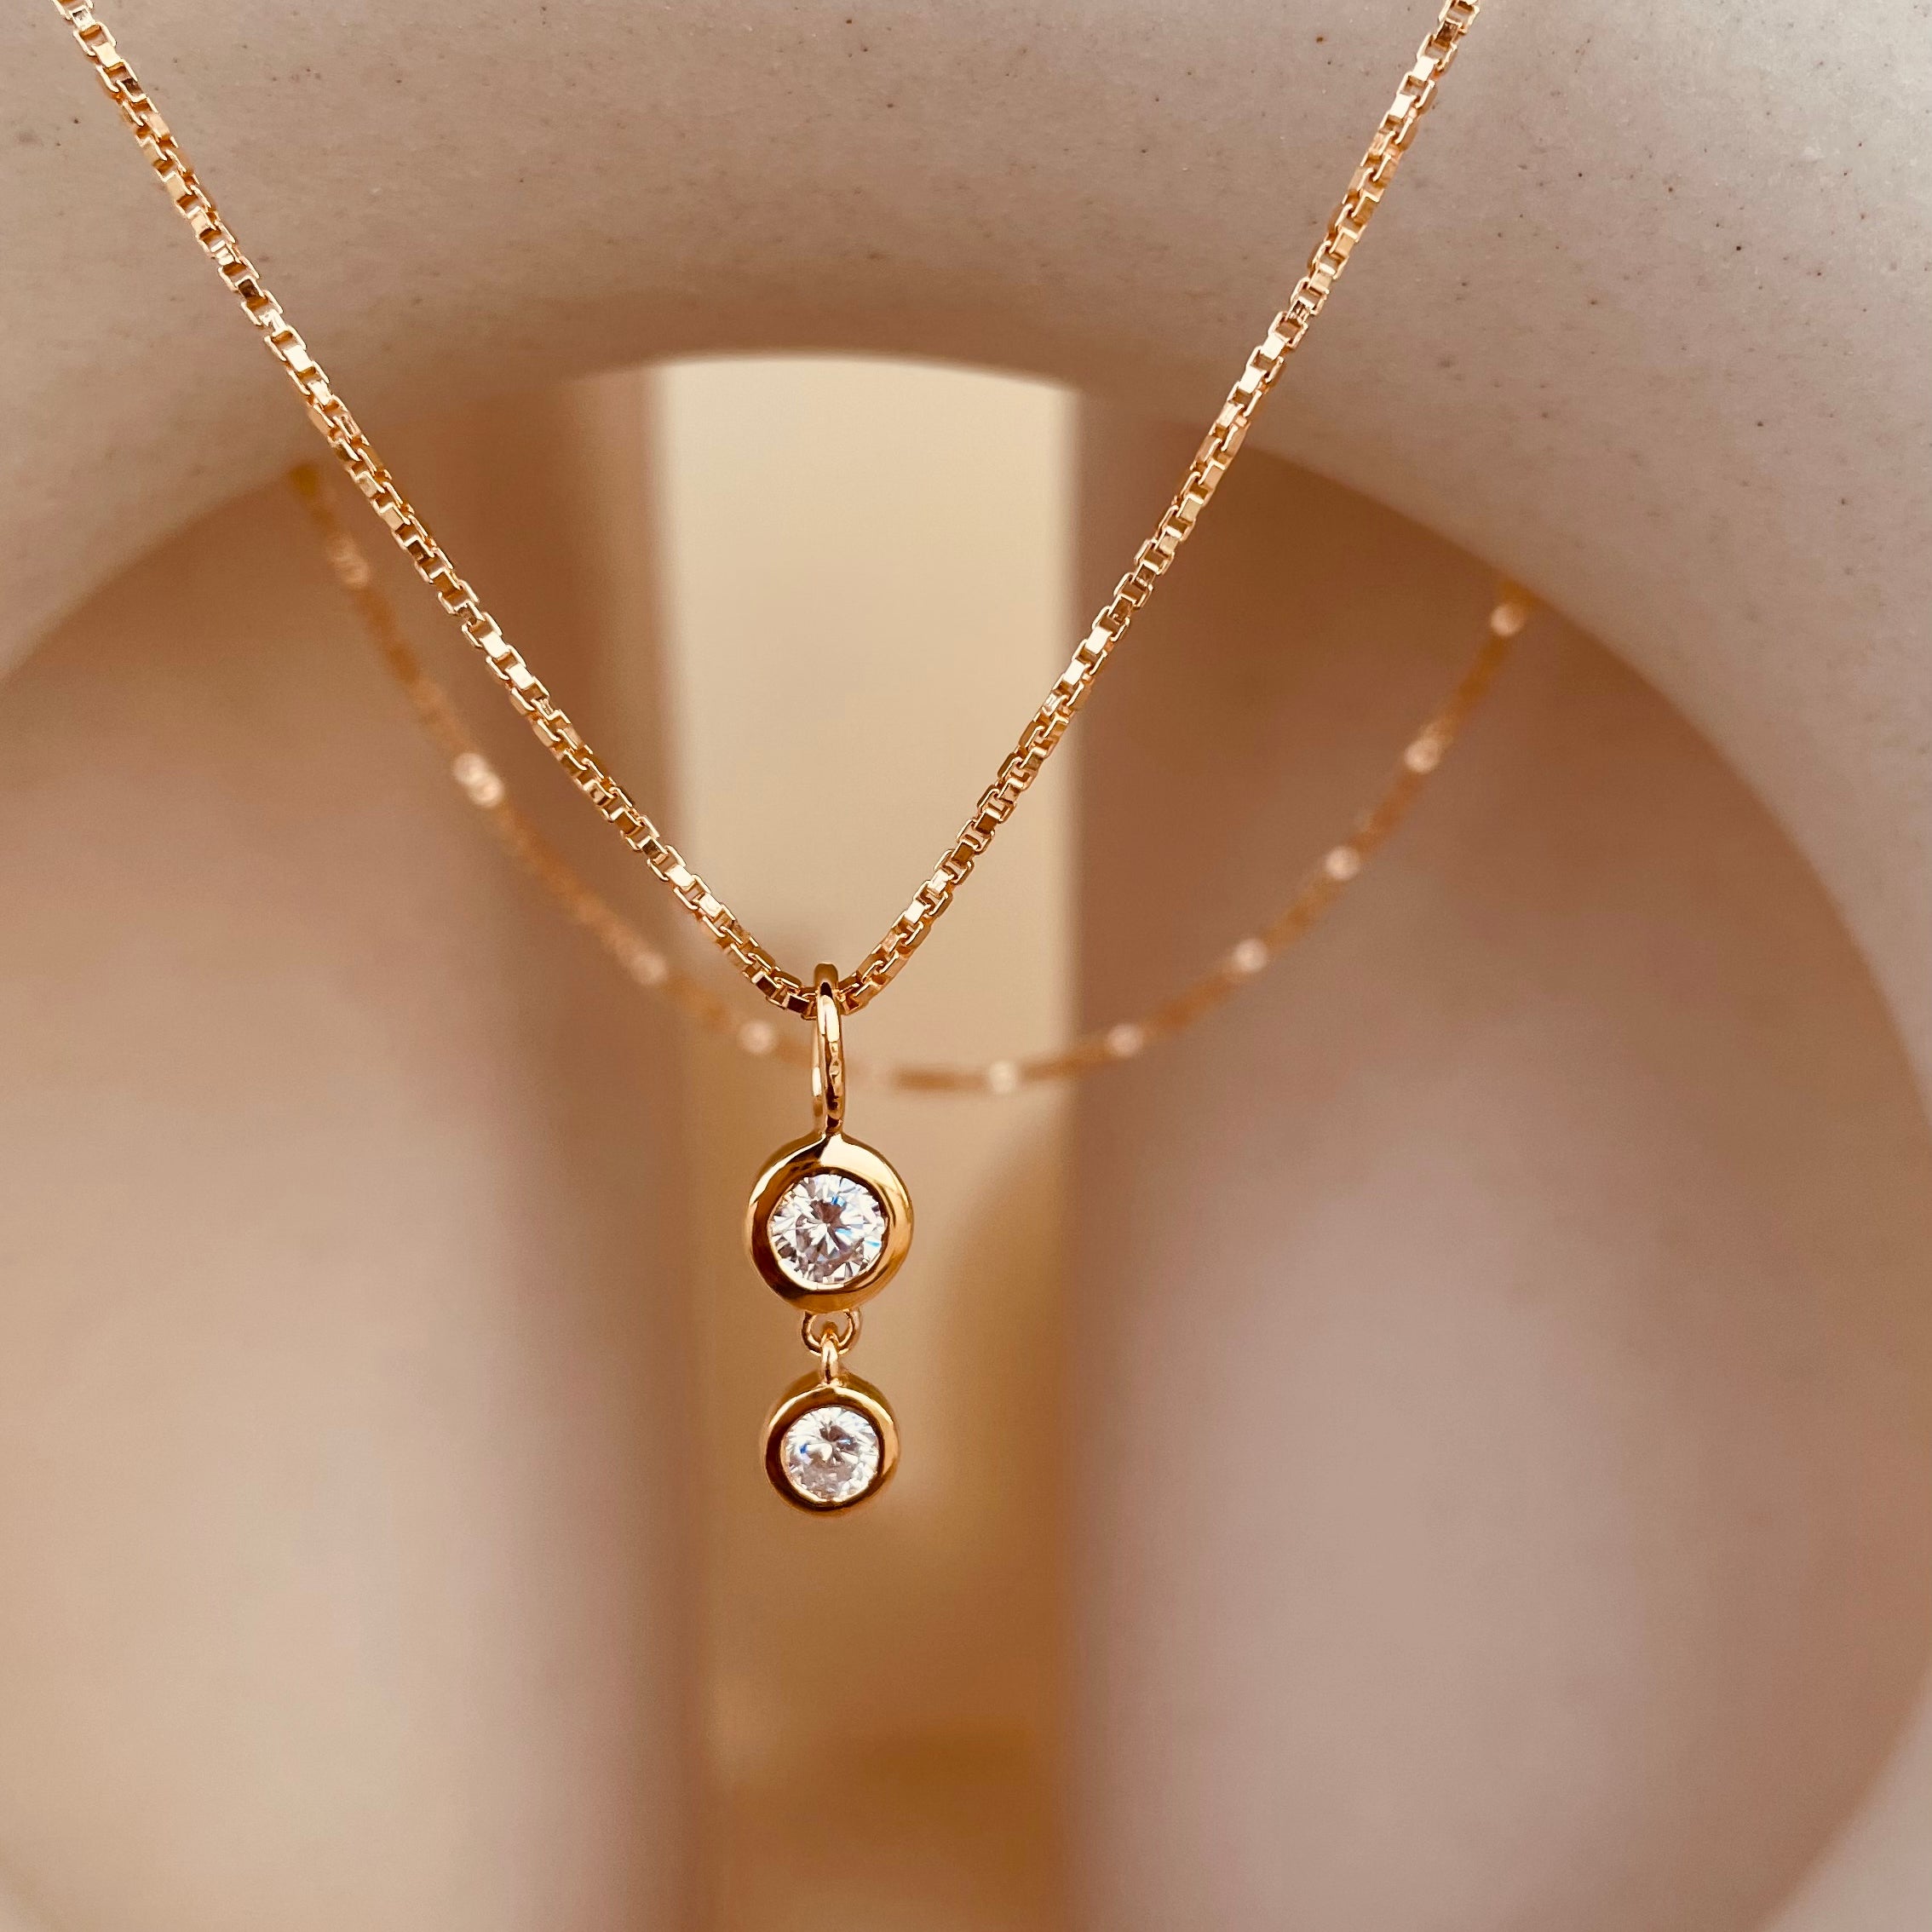 Minimal Double Drop Dangling Necklace with Box Chain - Octonov 